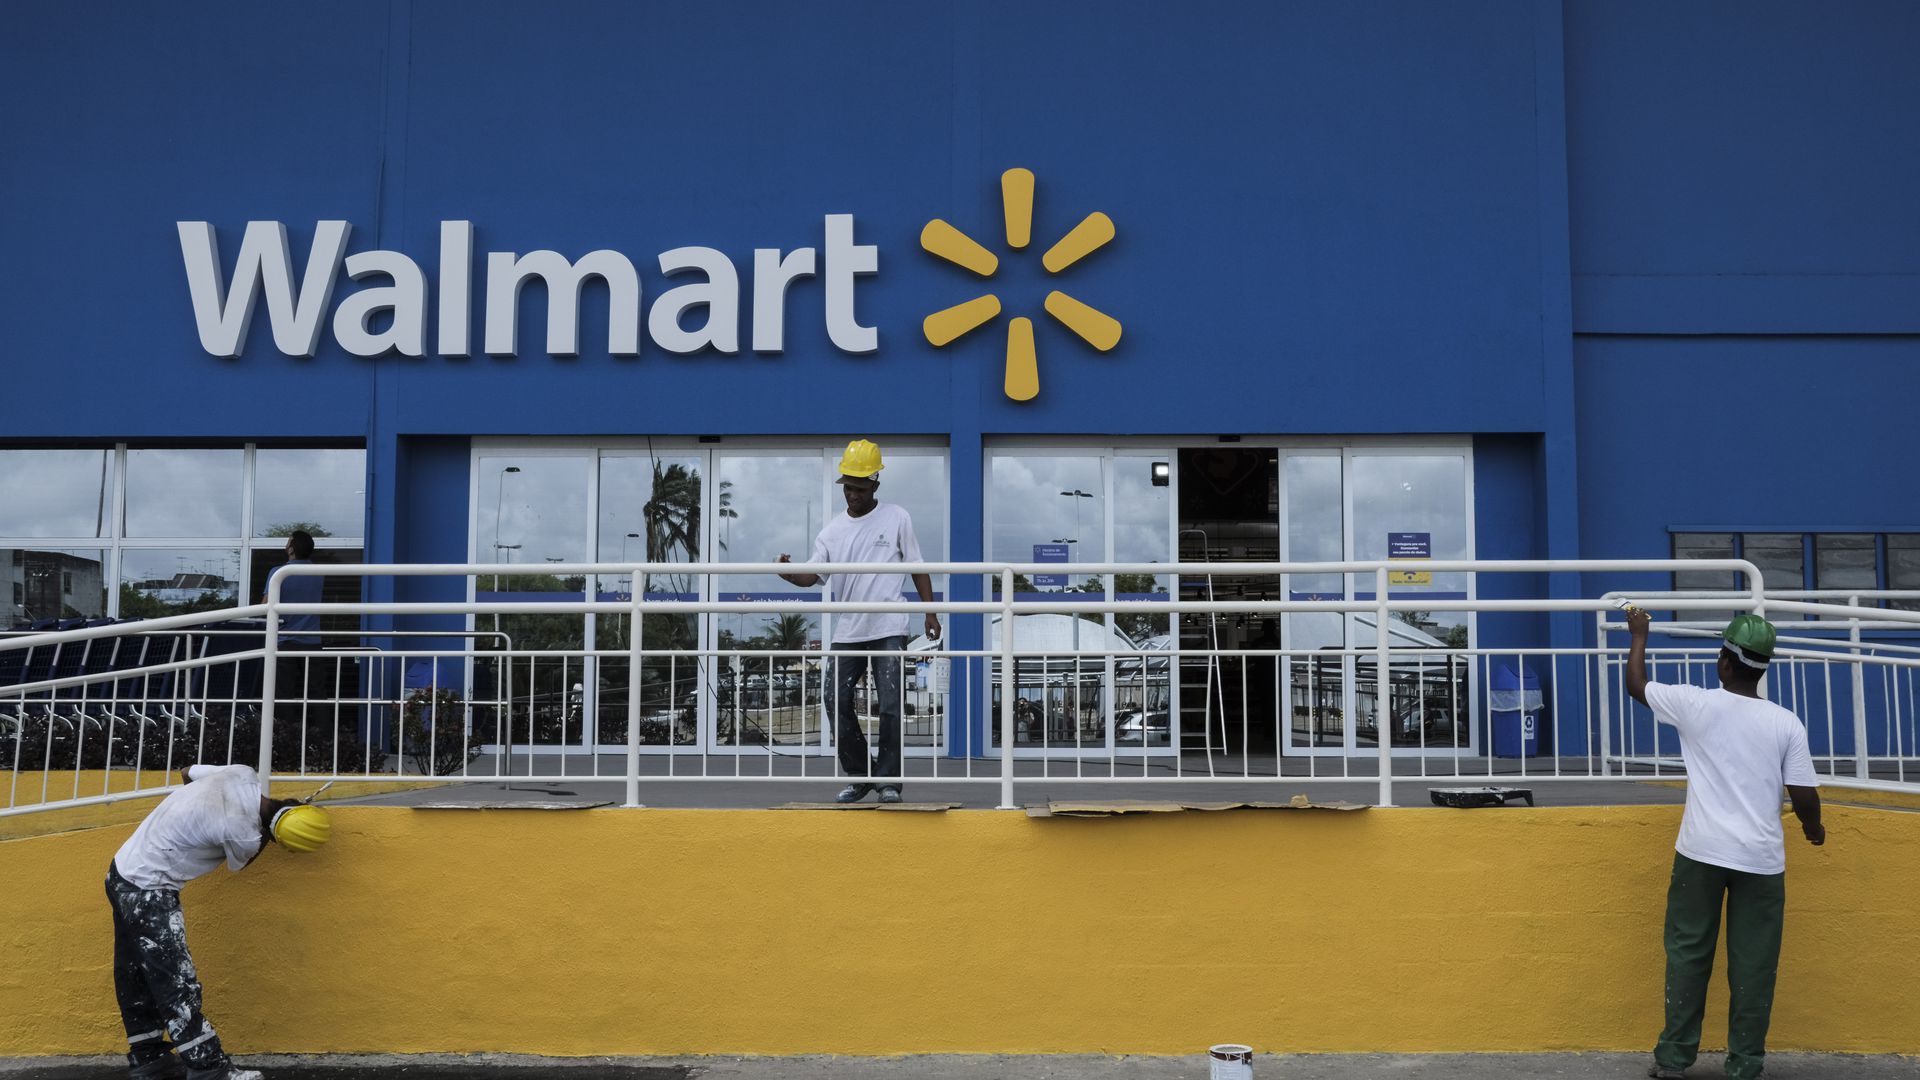 The Barrett Brief - Walmart and Disney contribute to the death of cultural transmission